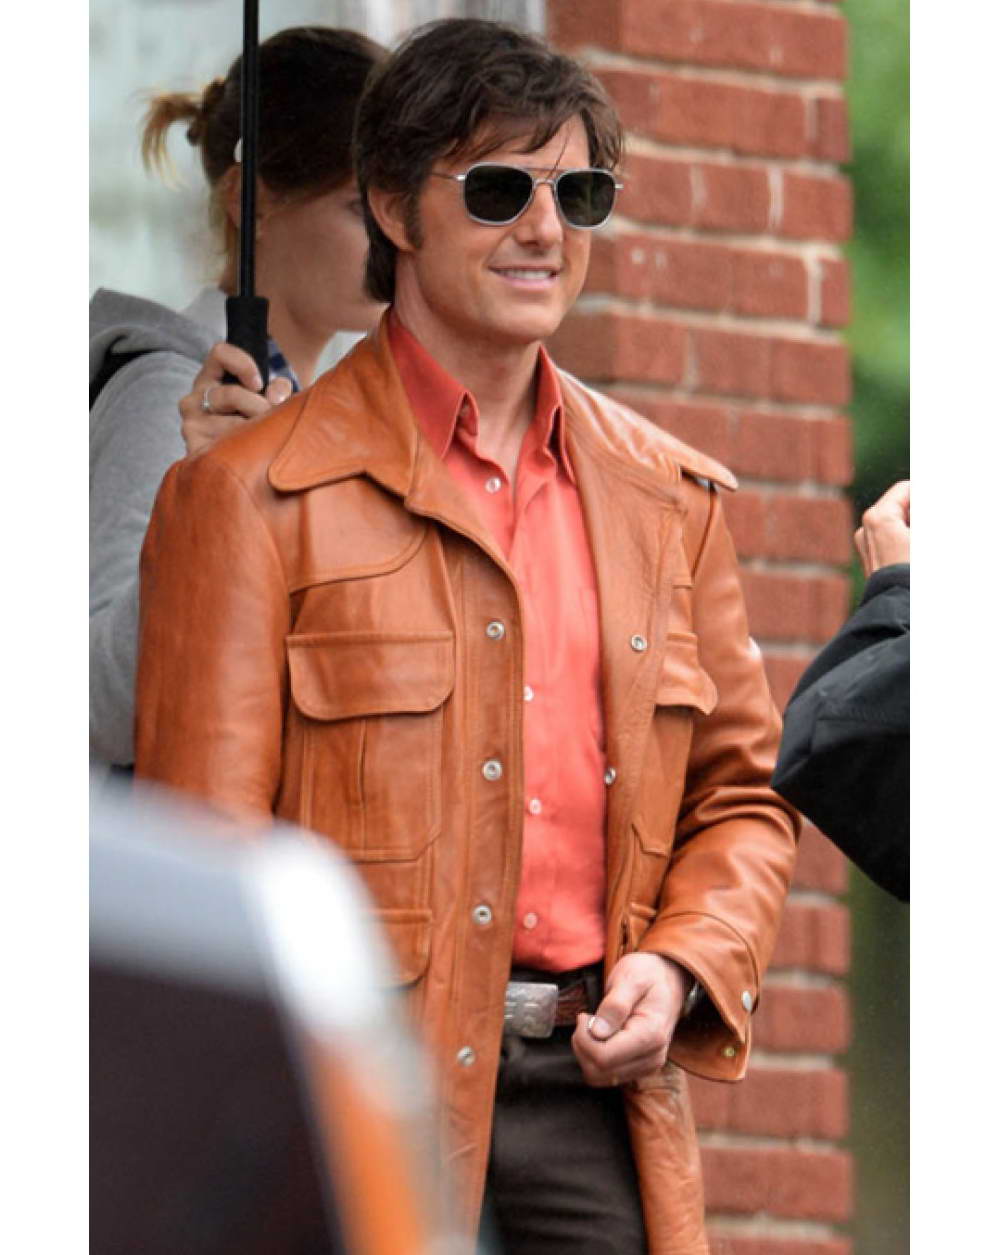 American-Made American Made Movie Tom Cruise Leather Jacket